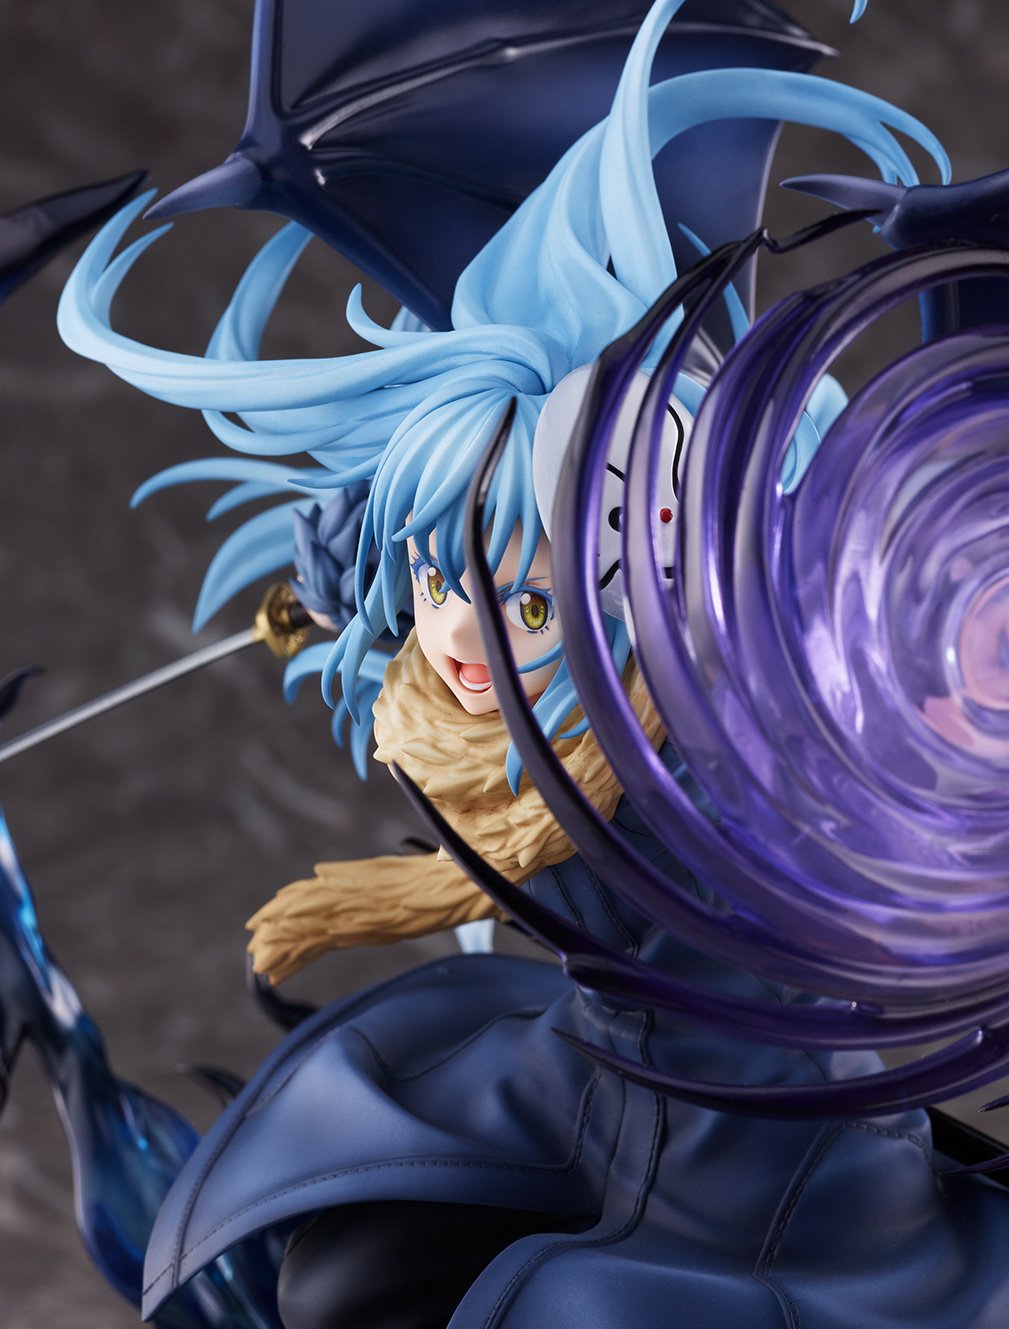 That Time I Got Reincarnated as a Slime - Rimuru Tempest Figure (Ultimate Ver) image count 9